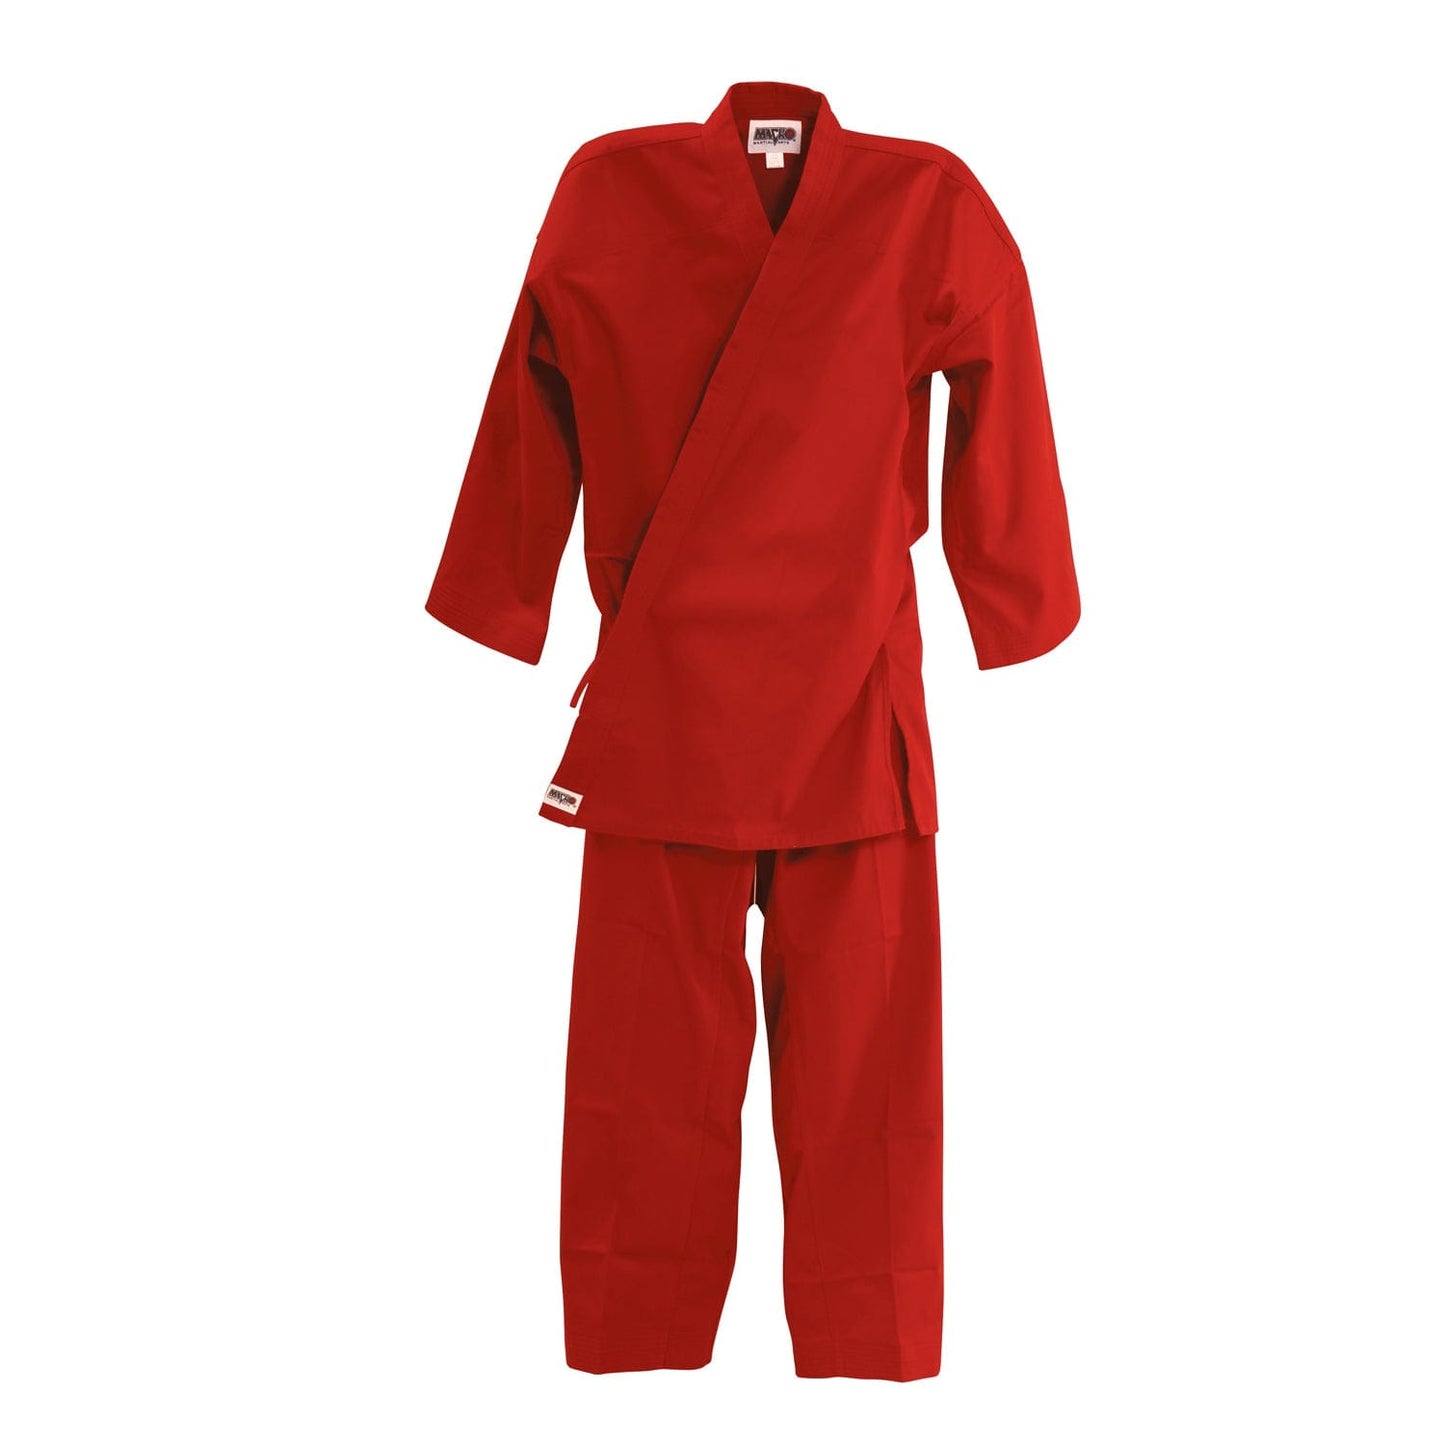 Macho sporting goods MACHO TRADITIONAL MIDDLEWEIGHT Karate